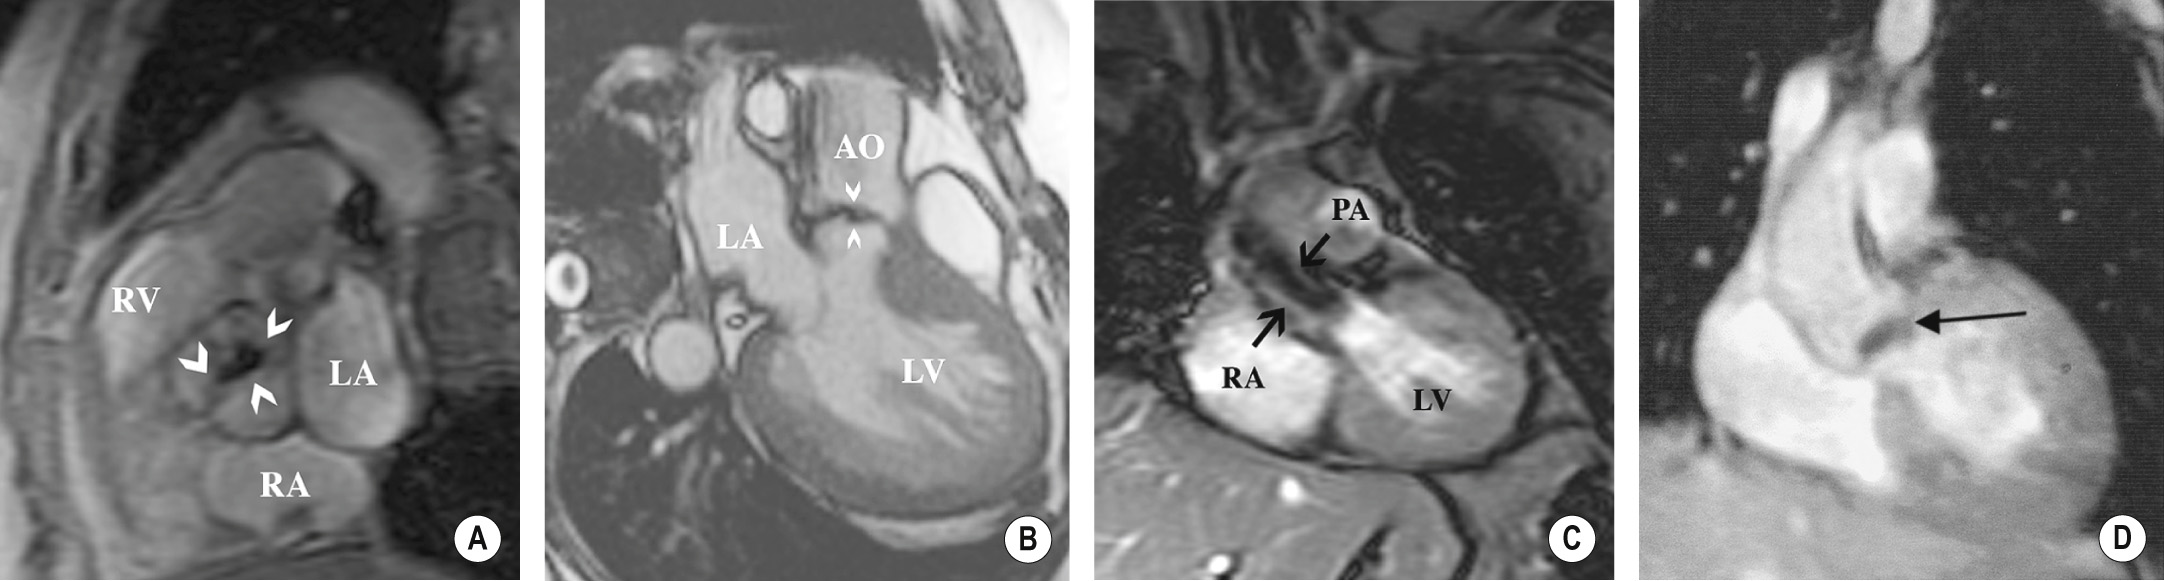 Tricuspid aortic stenosis. CMR of (A) aortic valve view, diastolic image, (B) left ventricular outflow tract (LVOT) view, systolic image, and (C) coronal, ascending aorta view. In the aortic valve view (A), fusion of the commissures of a markedly thickened valve is noted (arrowheads). Doming of the valve leaflets is noted in the LVOT projection (arrowheads) (B). The systolic image demonstrates the turbulent jet (arrows) from aortic stenosis (C). (D) Coronal gradient-echo MRI image (ECG gated) through the left ventricular outflow tract and aortic valve in a patient with calcific aortic stenosis. There is calcification of the aortic valve, which produces a signal void (arrow). AO = ascending aorta, LA = left atrium, LV = left ventricle, PA = pulmonary artery, RA = right atrium, RV = right ventricle. *